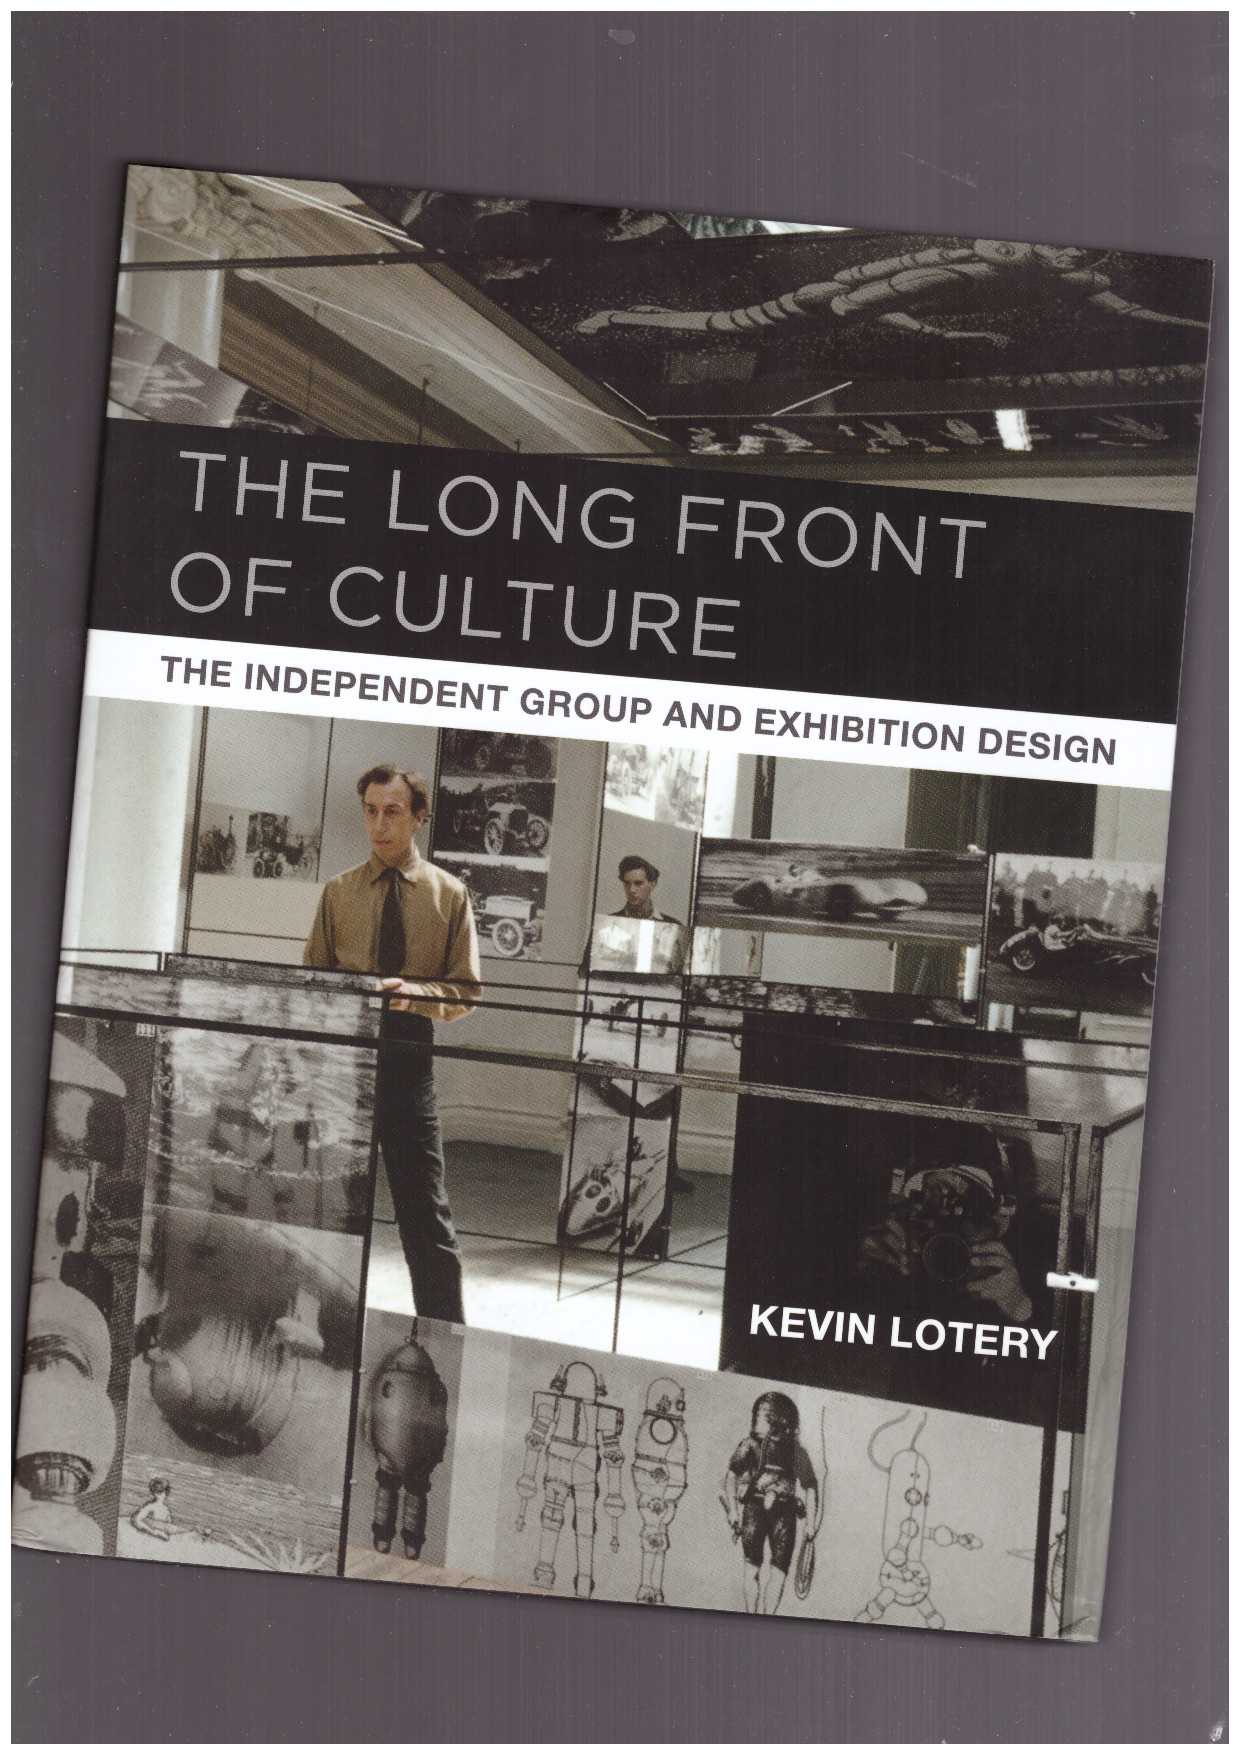 LOTERY, Kevin (ed.) - The Long Front of Culture. The Independent Group and Exhibition Design